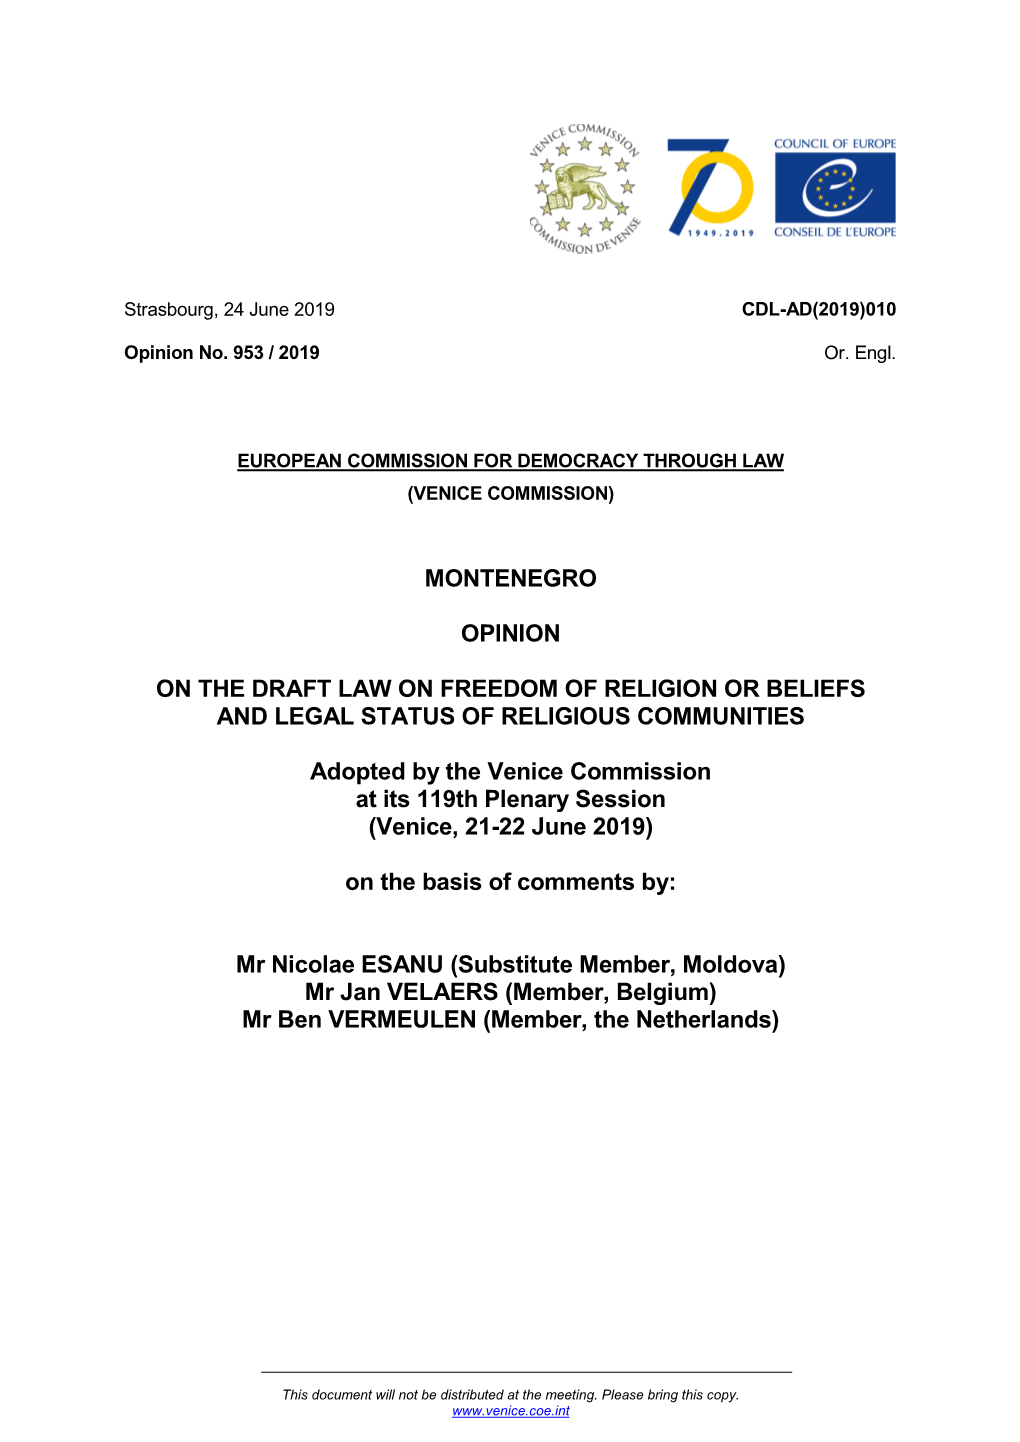 MONTENEGRO OPINION on the DRAFT LAW on FREEDOM of RELIGION OR BELIEFS and LEGAL STATUS of RELIGIOUS COMMUNITIES Adopted By